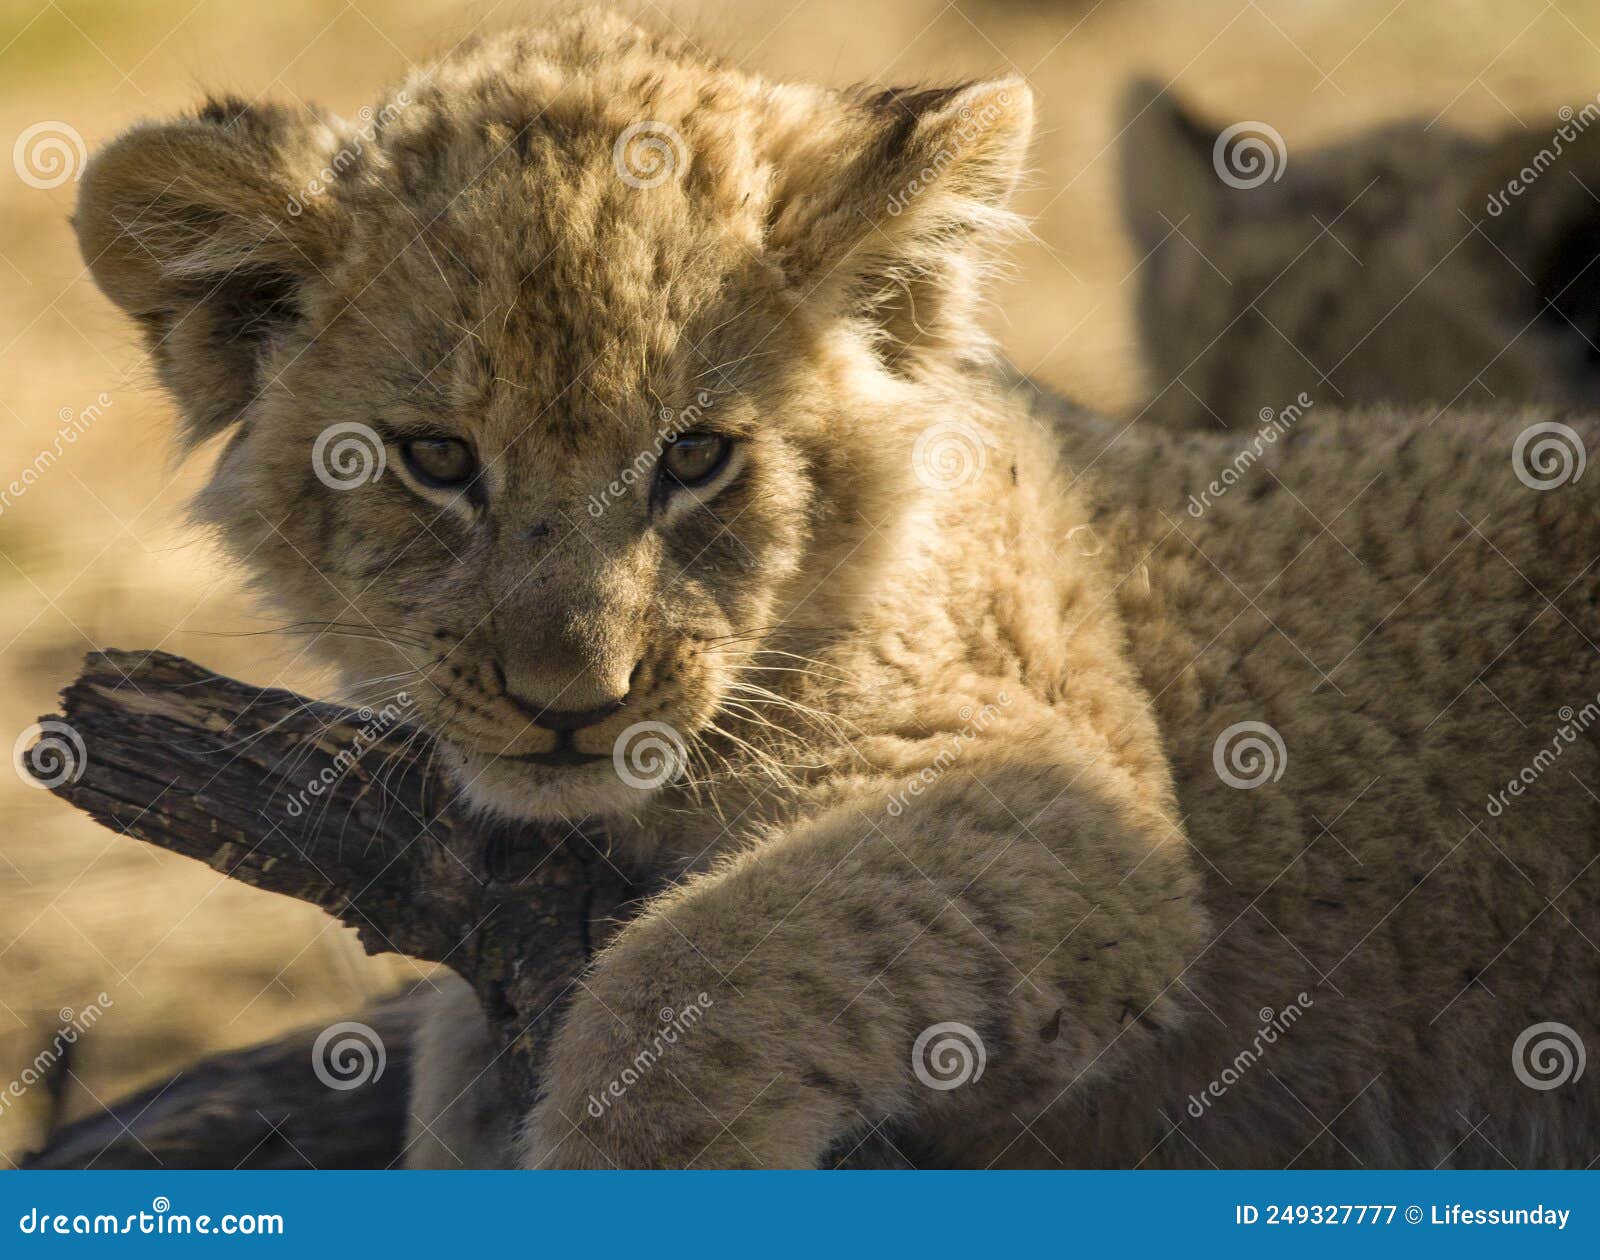 cute lion cub face is about one of the big five of animal safaris across the african savannah